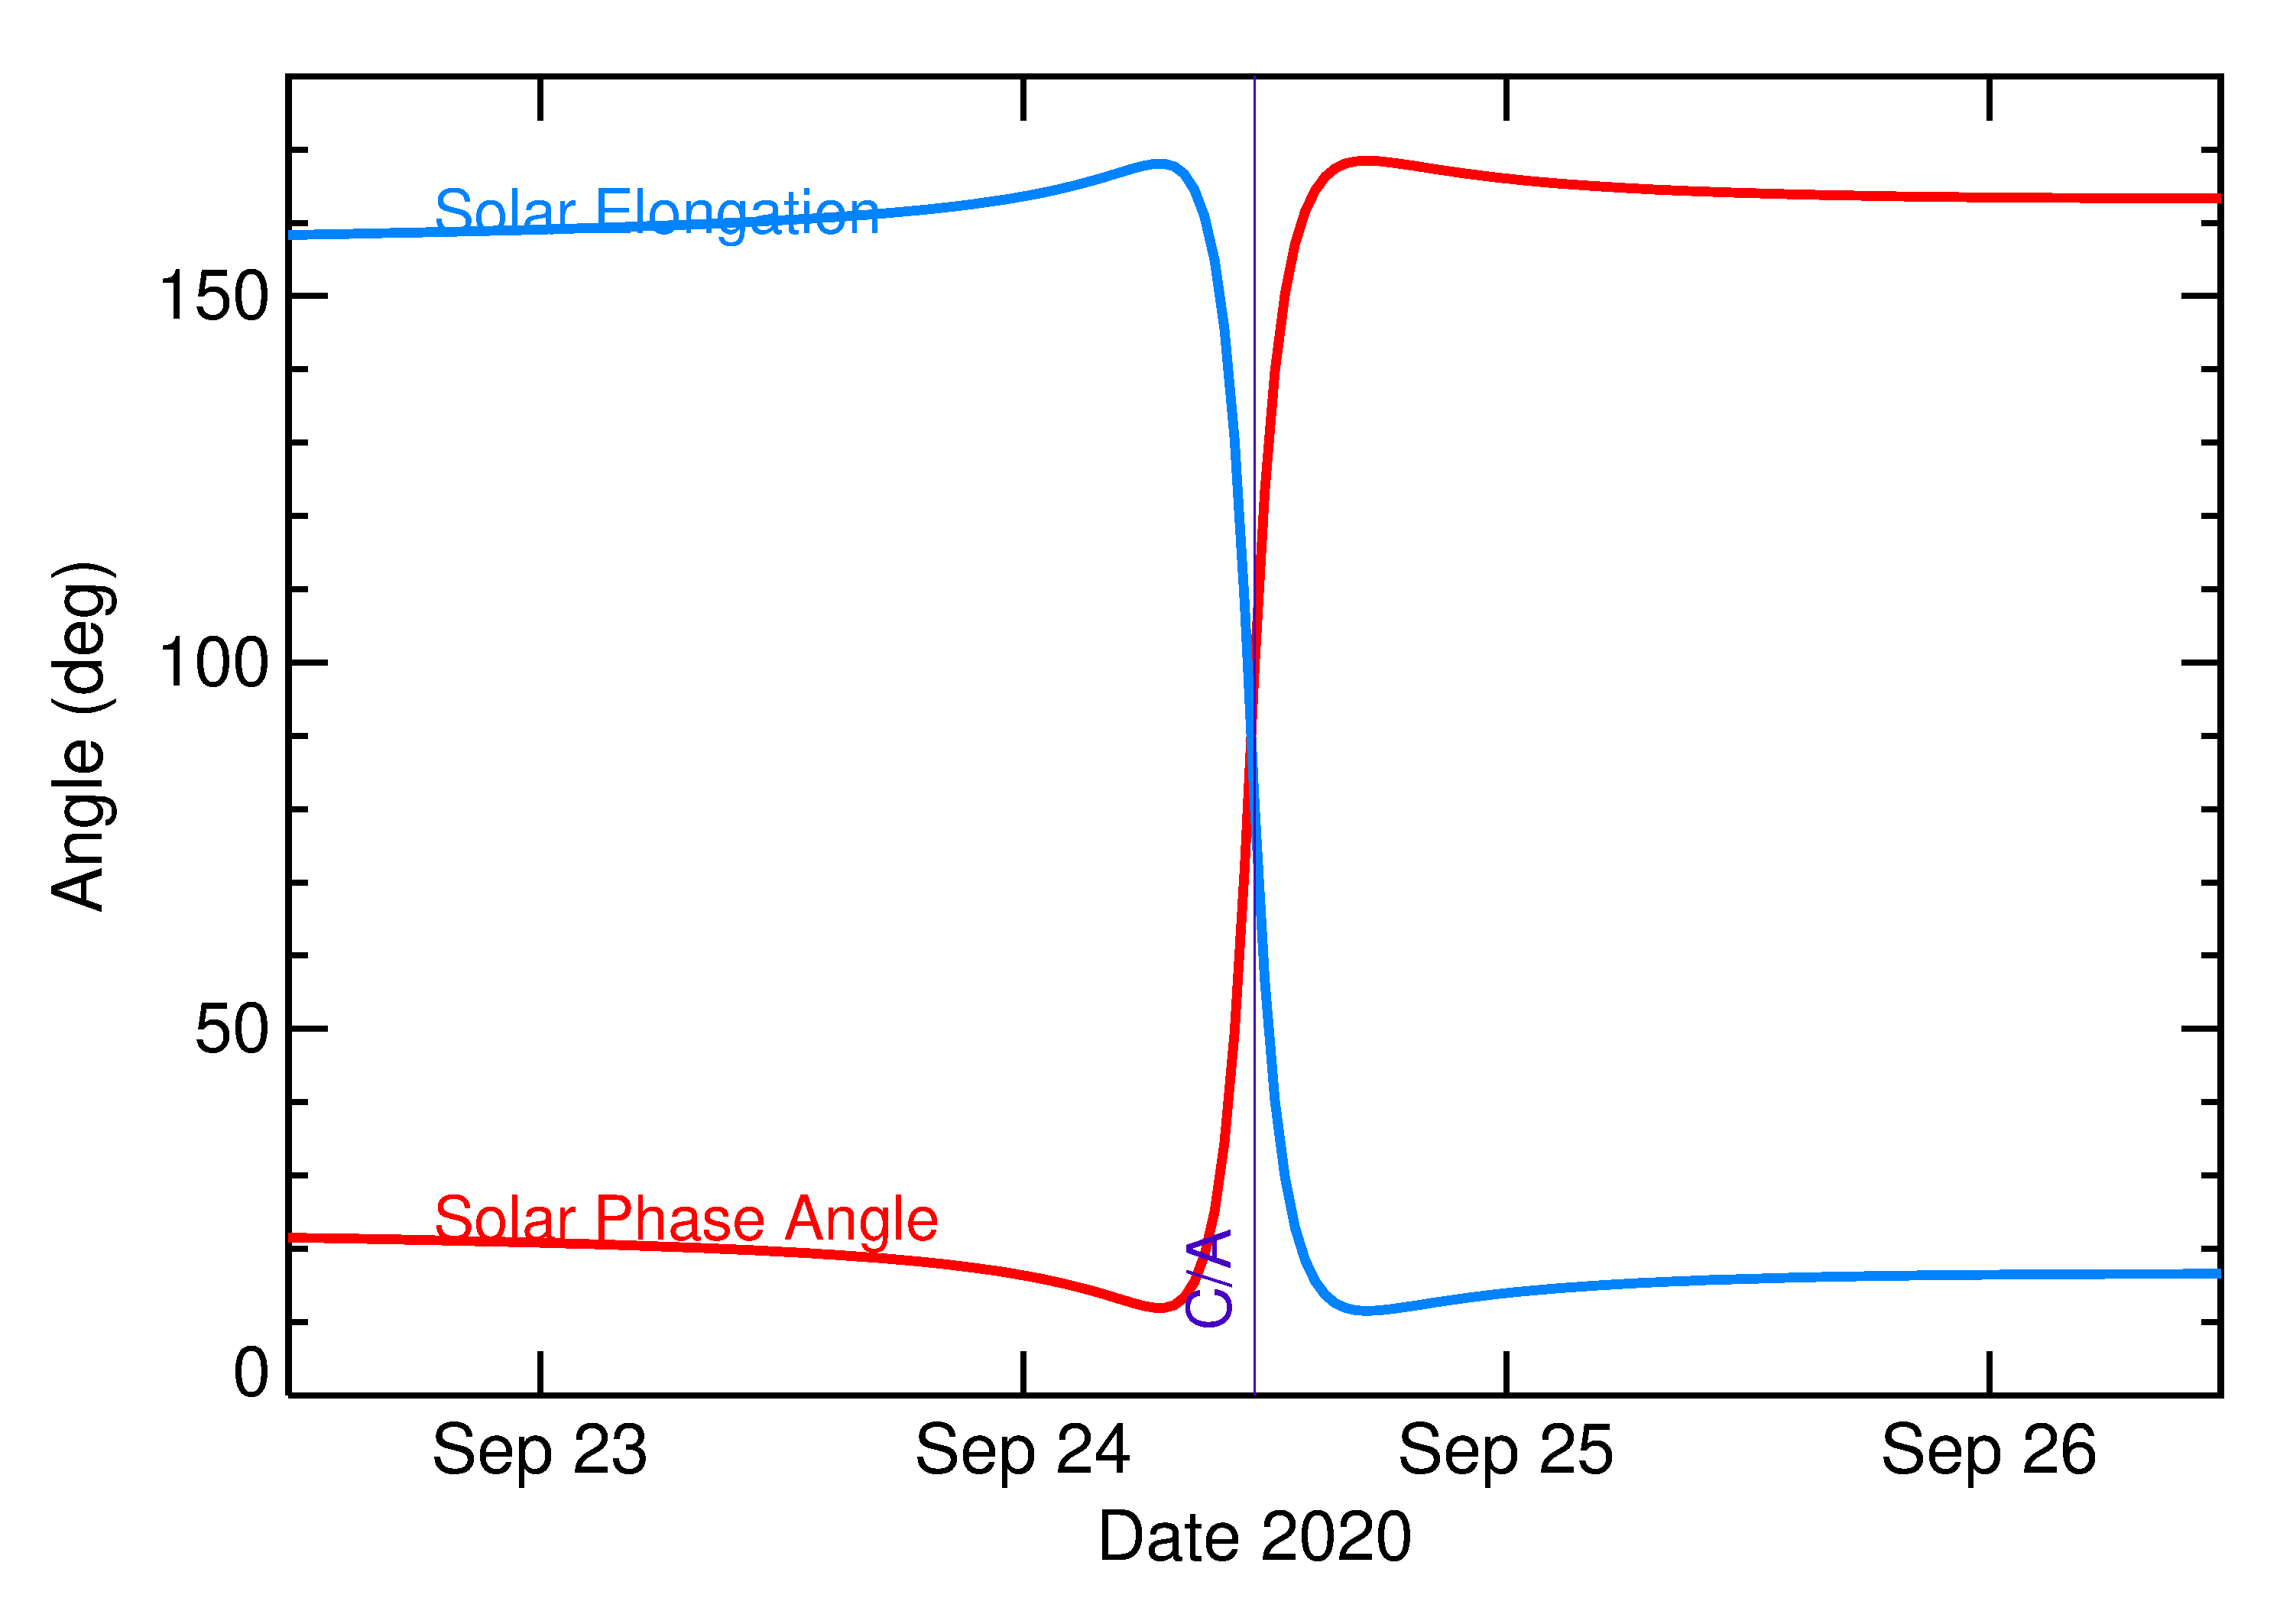 Solar Elongation and Solar Phase Angle of 2020 SW in the days around closest approach